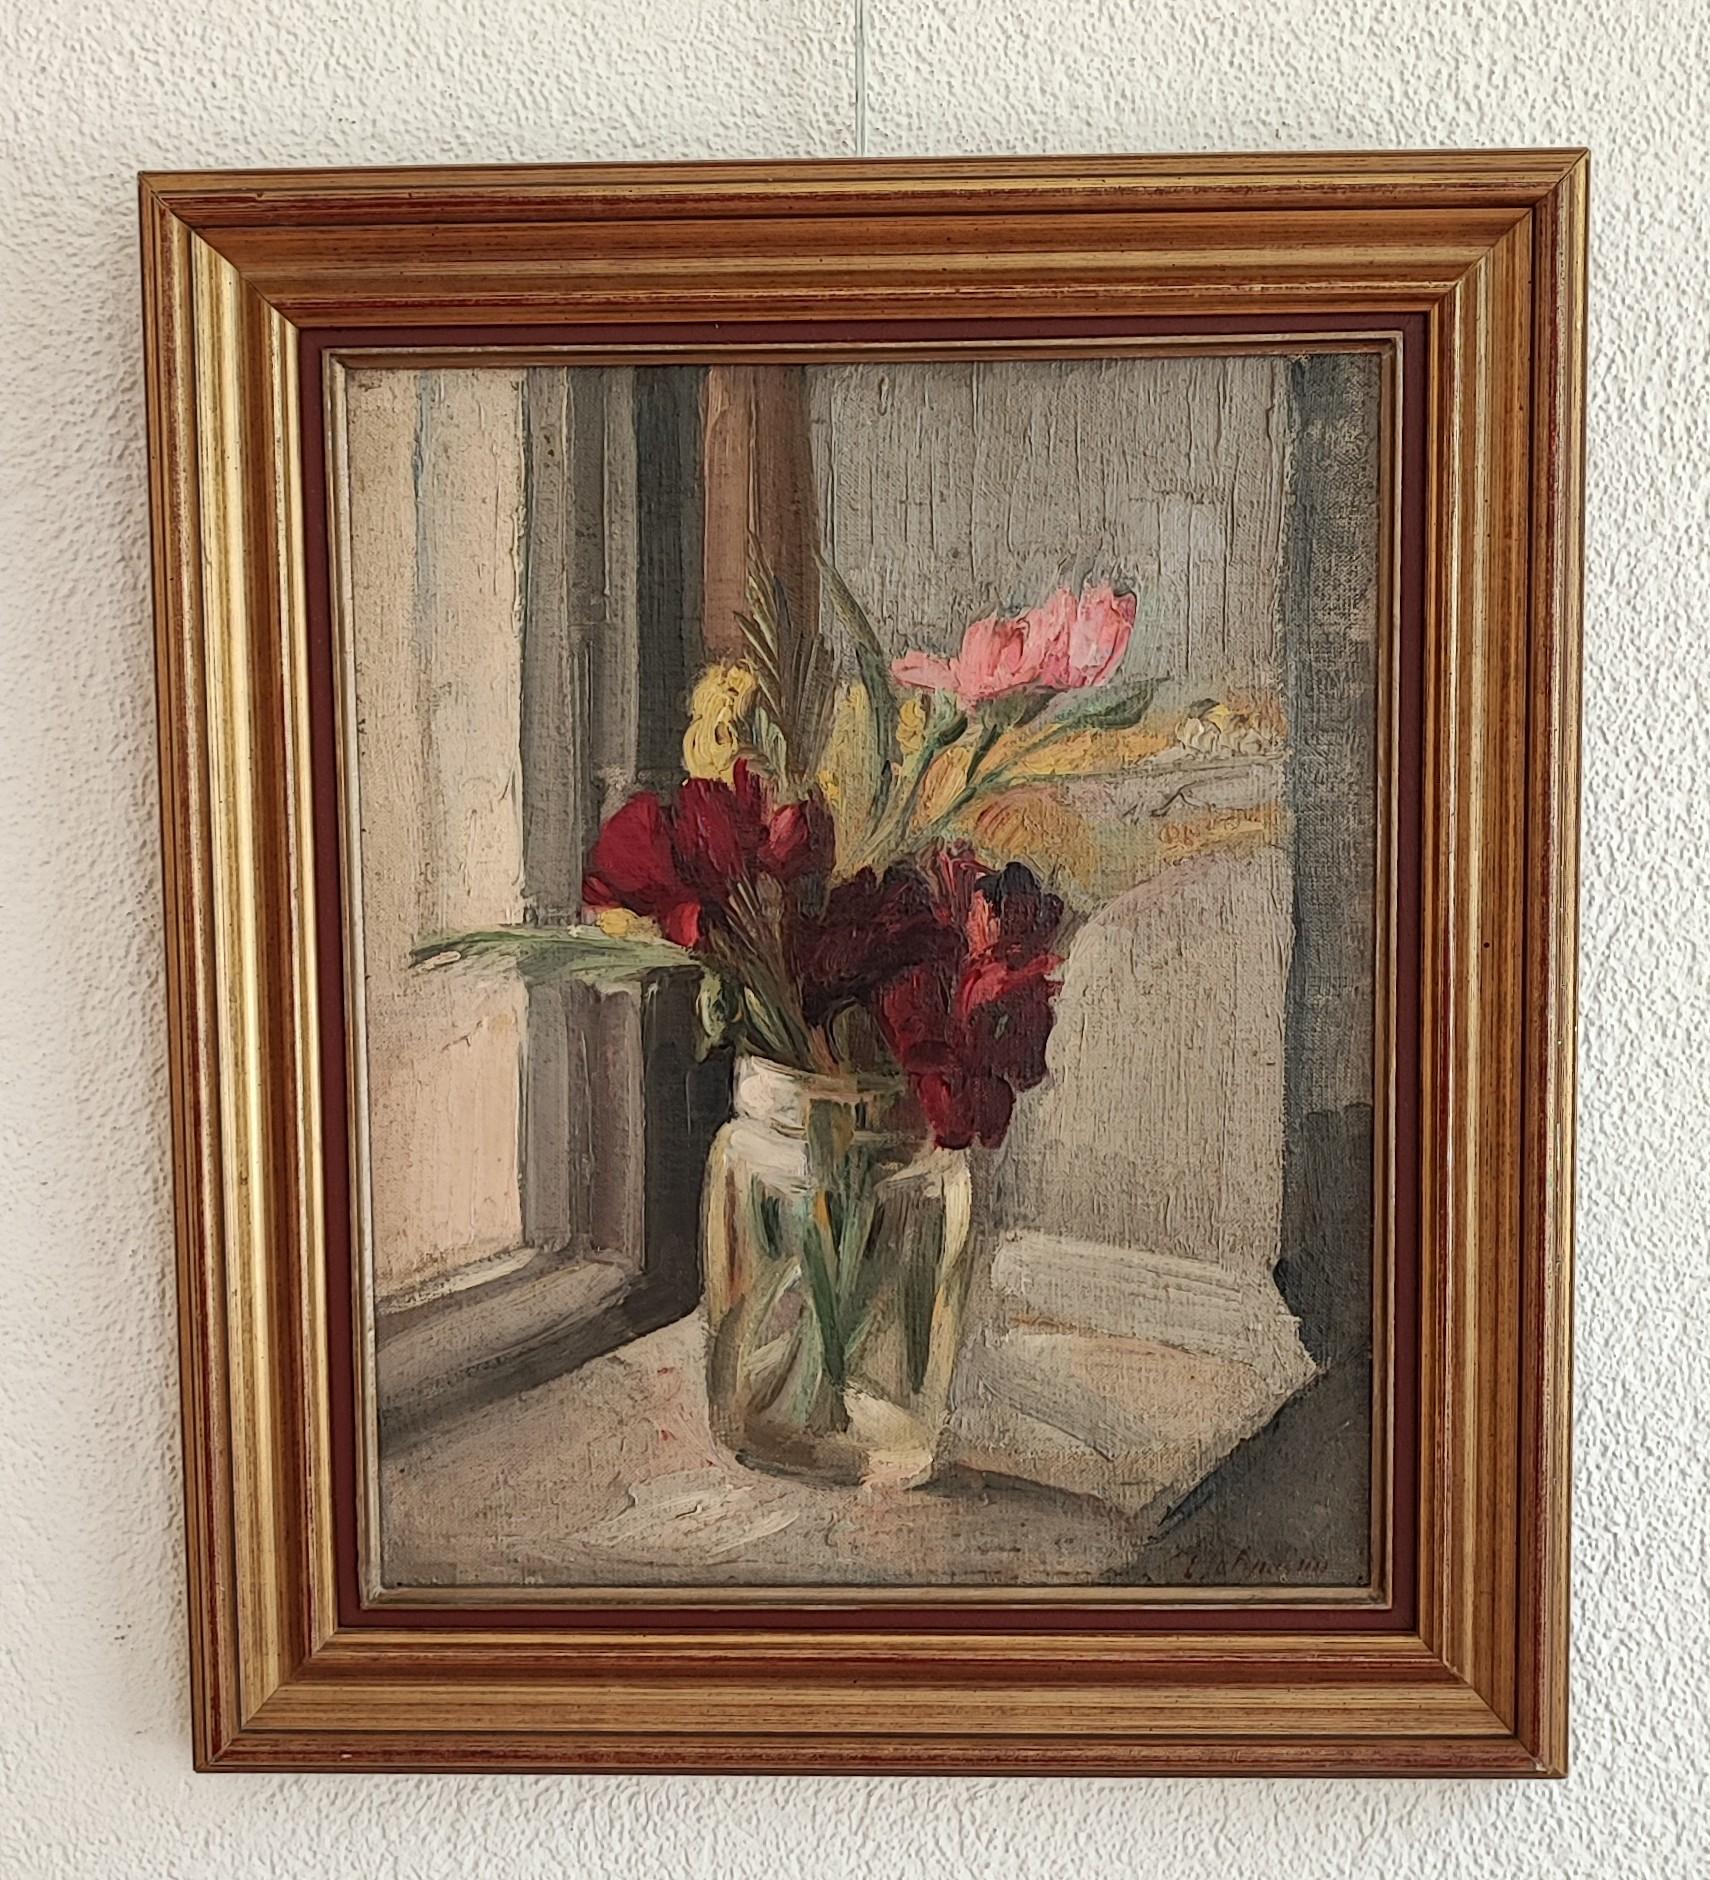 Bouquet of flowers by the window - Painting by Louis Henri Salzmann